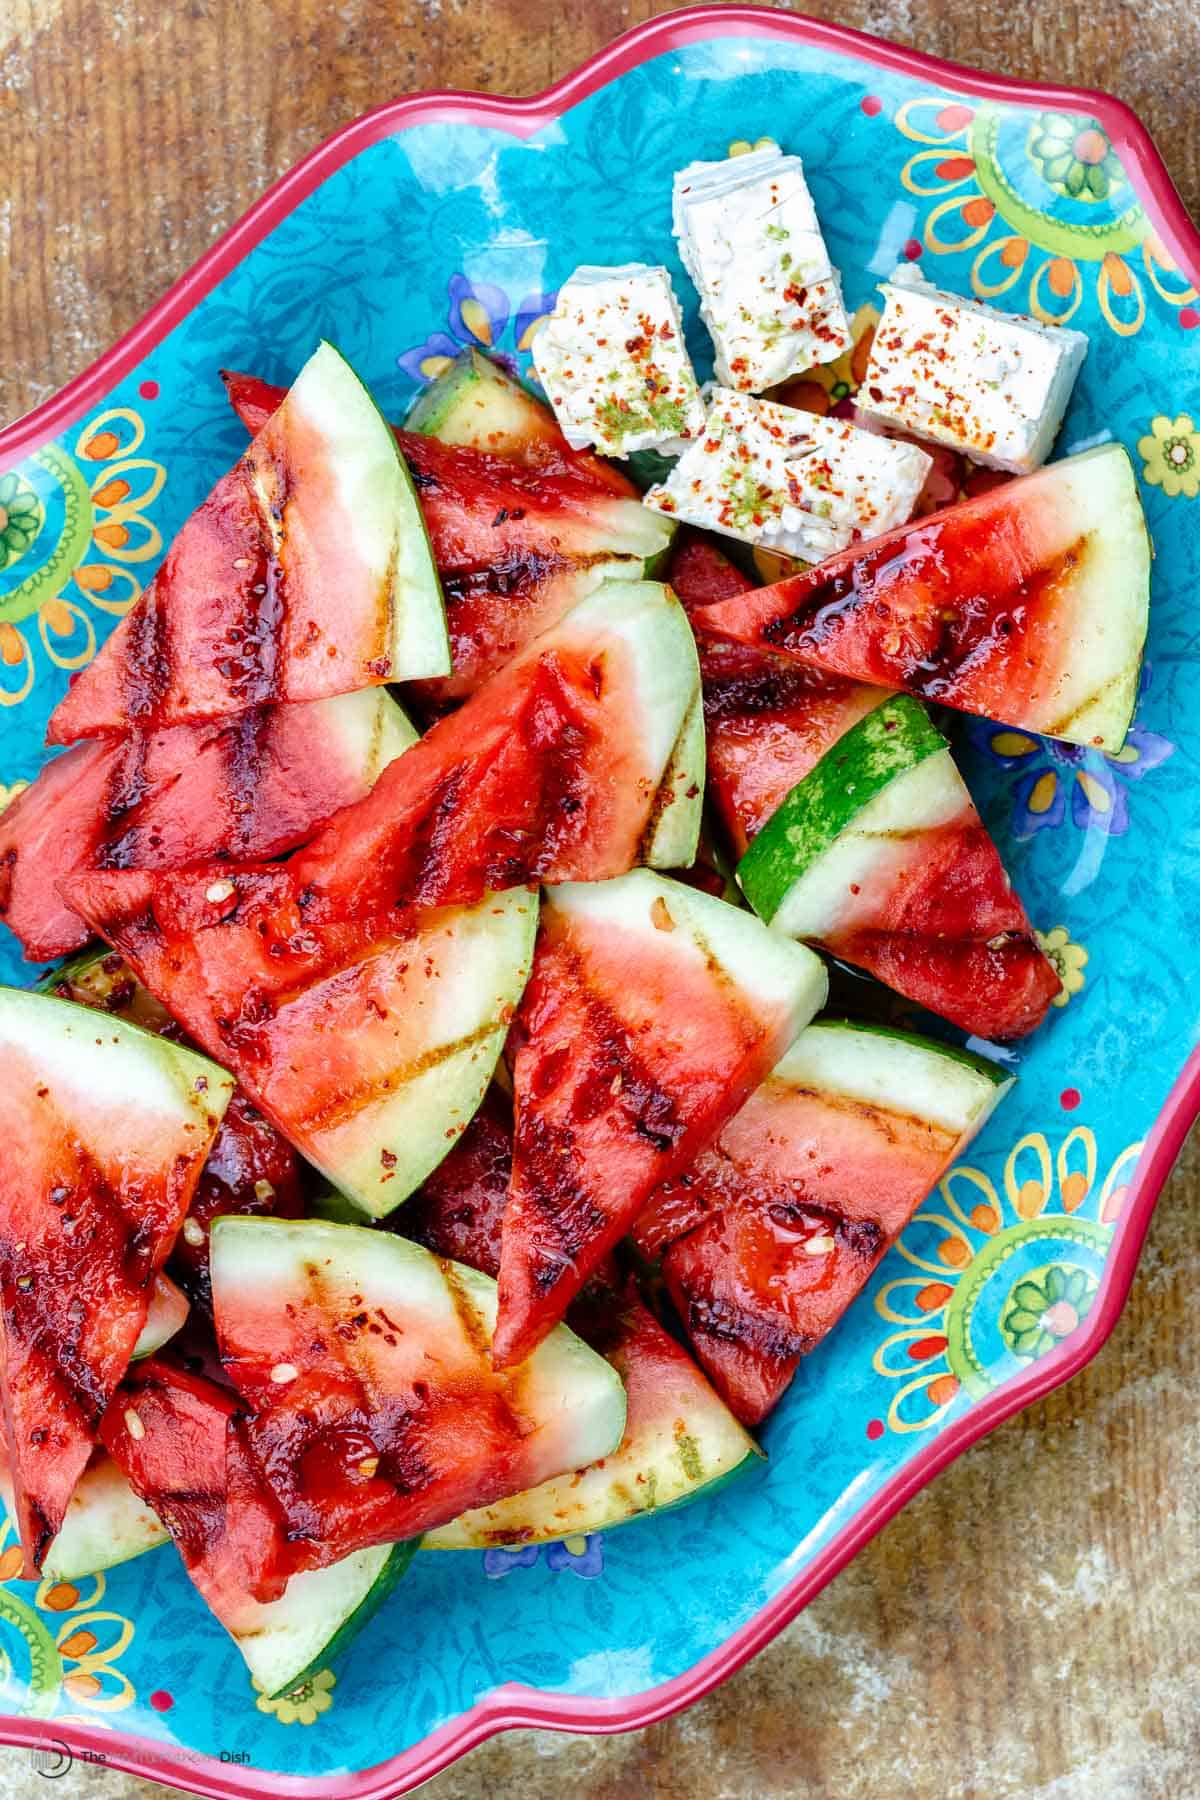 Grilled watermelon slices and feta on a blue plate